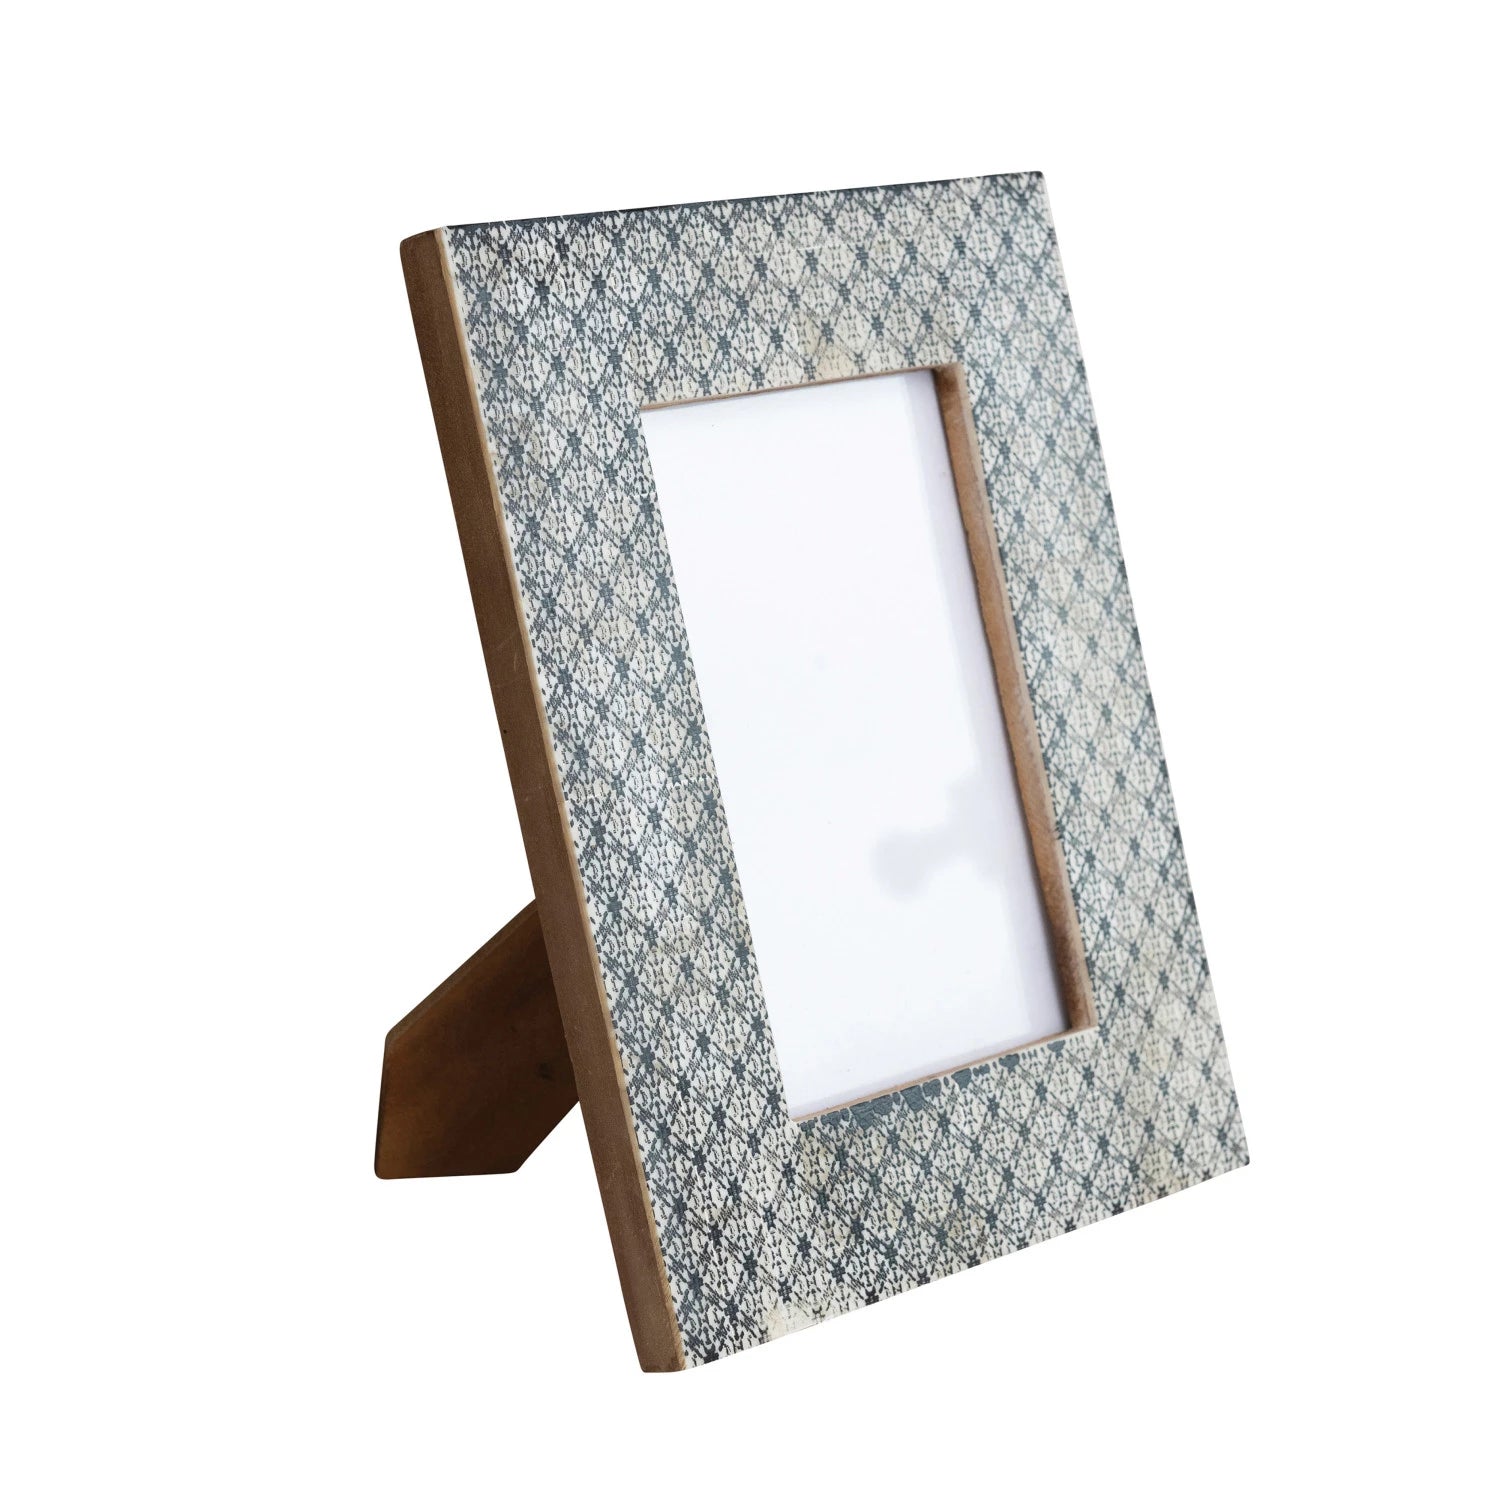 Charcoal Resin & Glass Photo Frame w/ Pattern